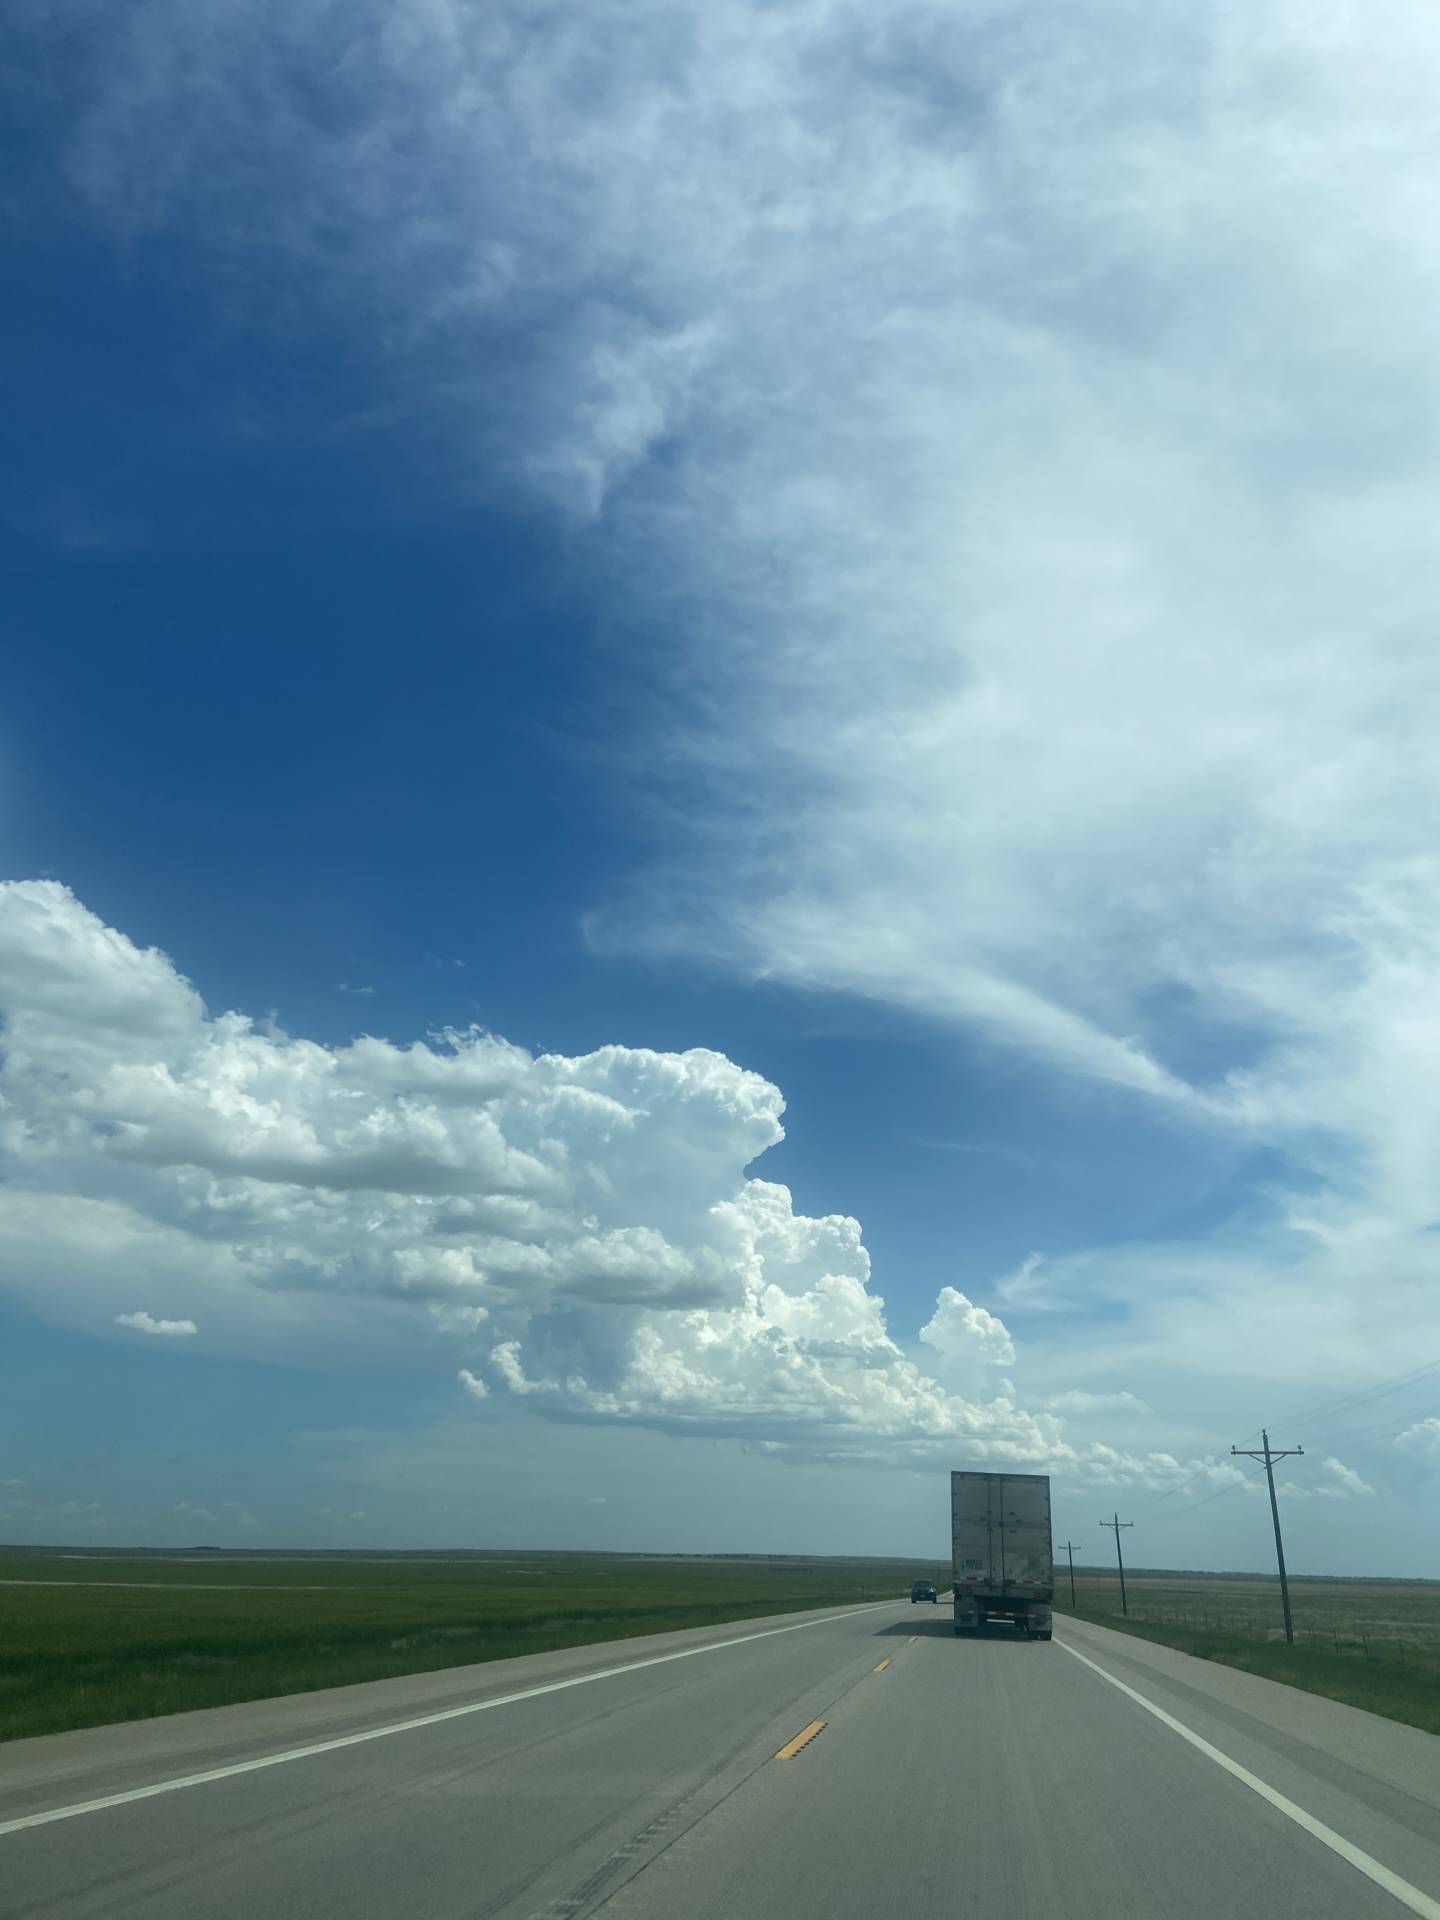 Developing tower, looking south from Eads, CO @ 02:49 PM